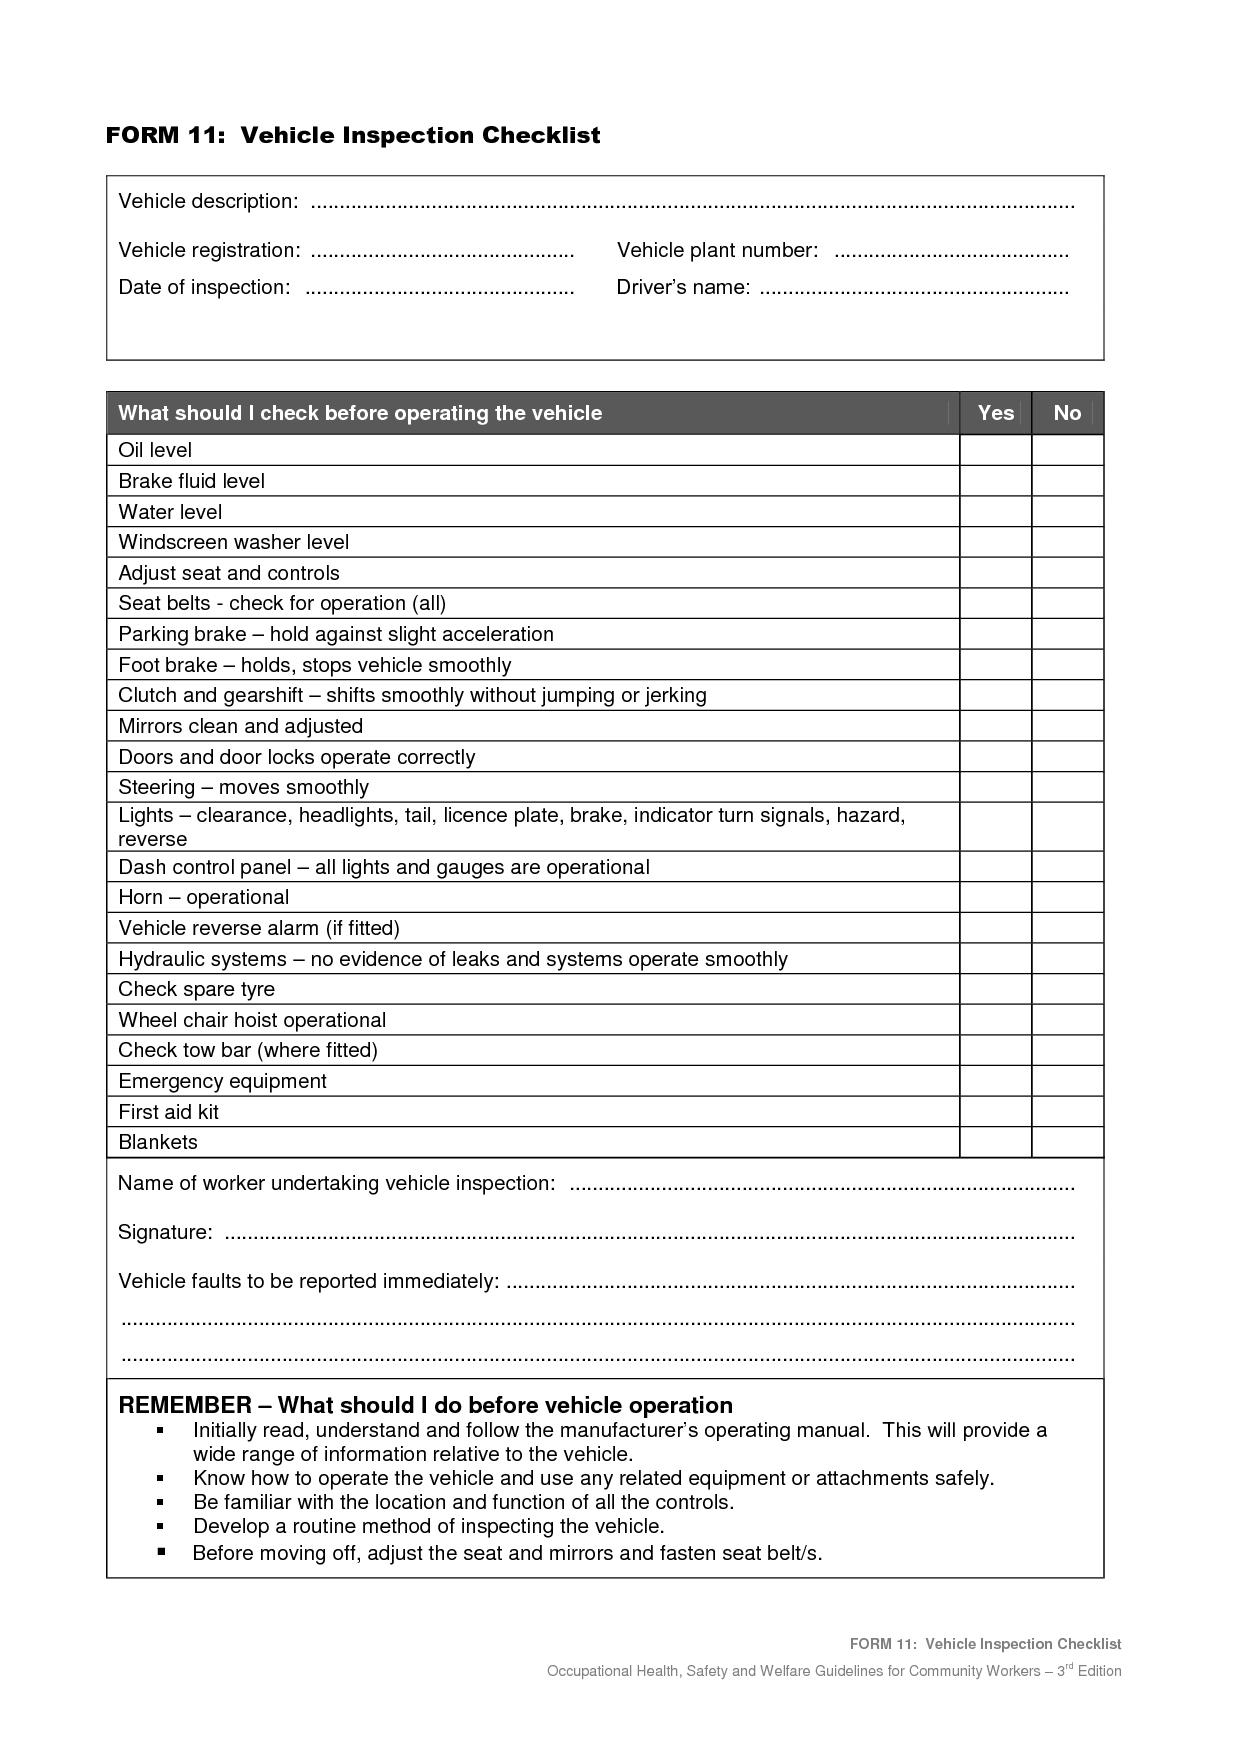 Vehicle Safety Inspection Checklist Form Maintenance Report In Vehicle Checklist Template Word